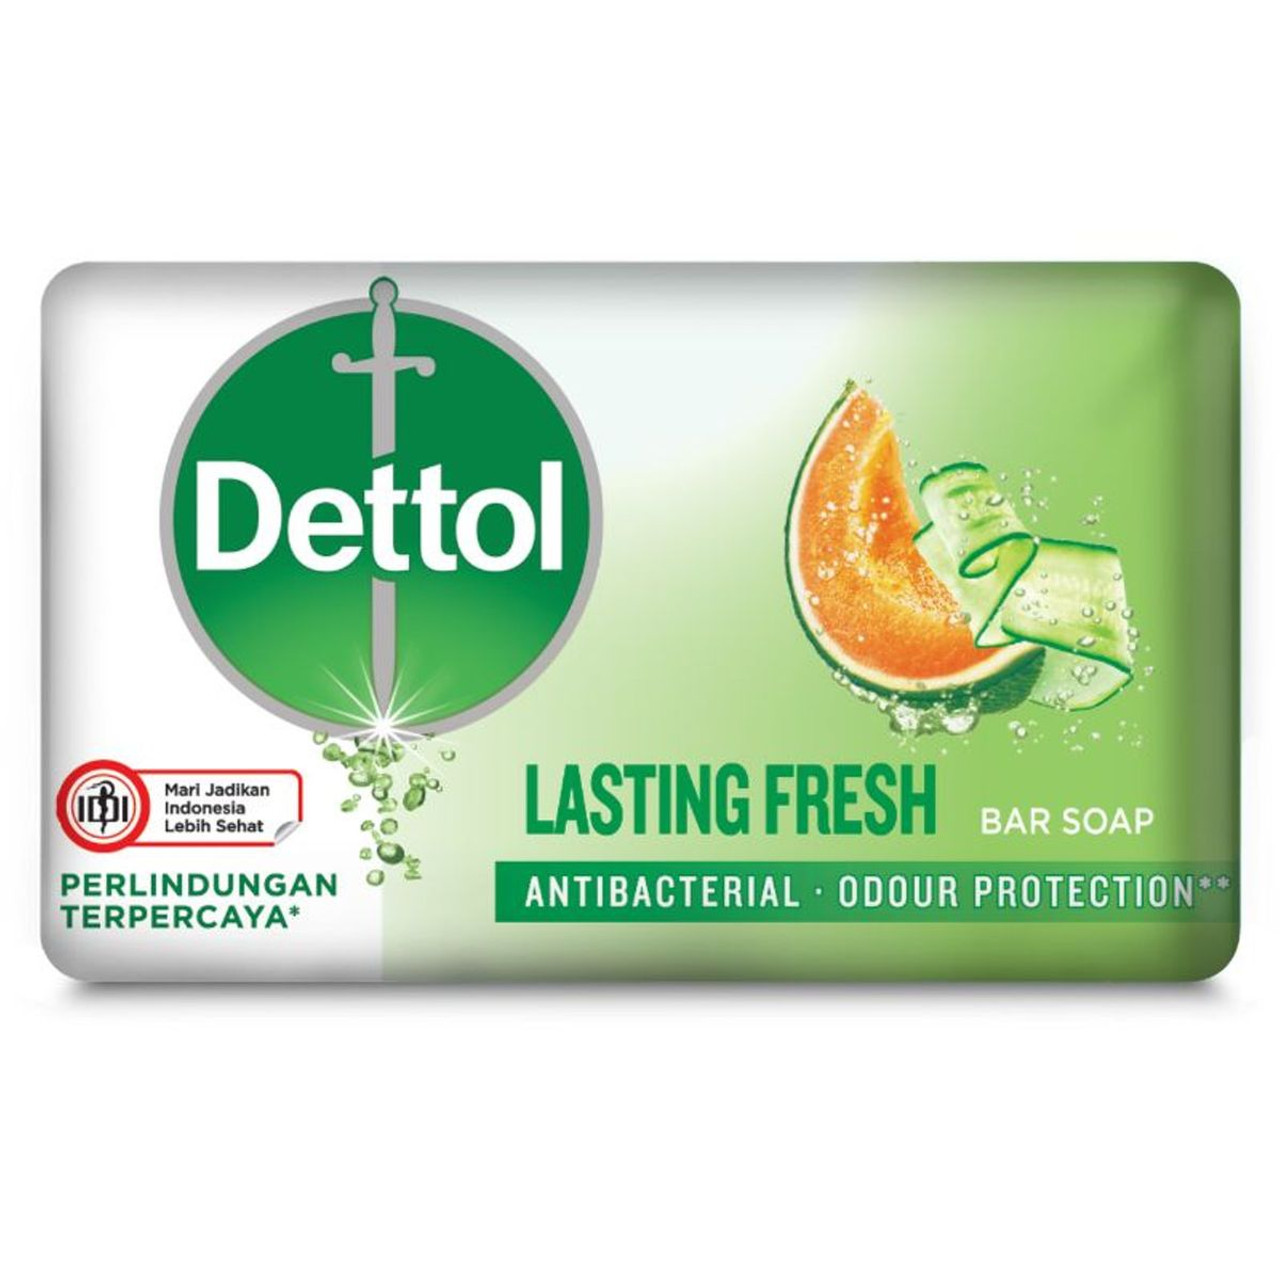 Dettol™ Assorted Antibacterial Bar Soap, 3.5g (15-Pack) product image